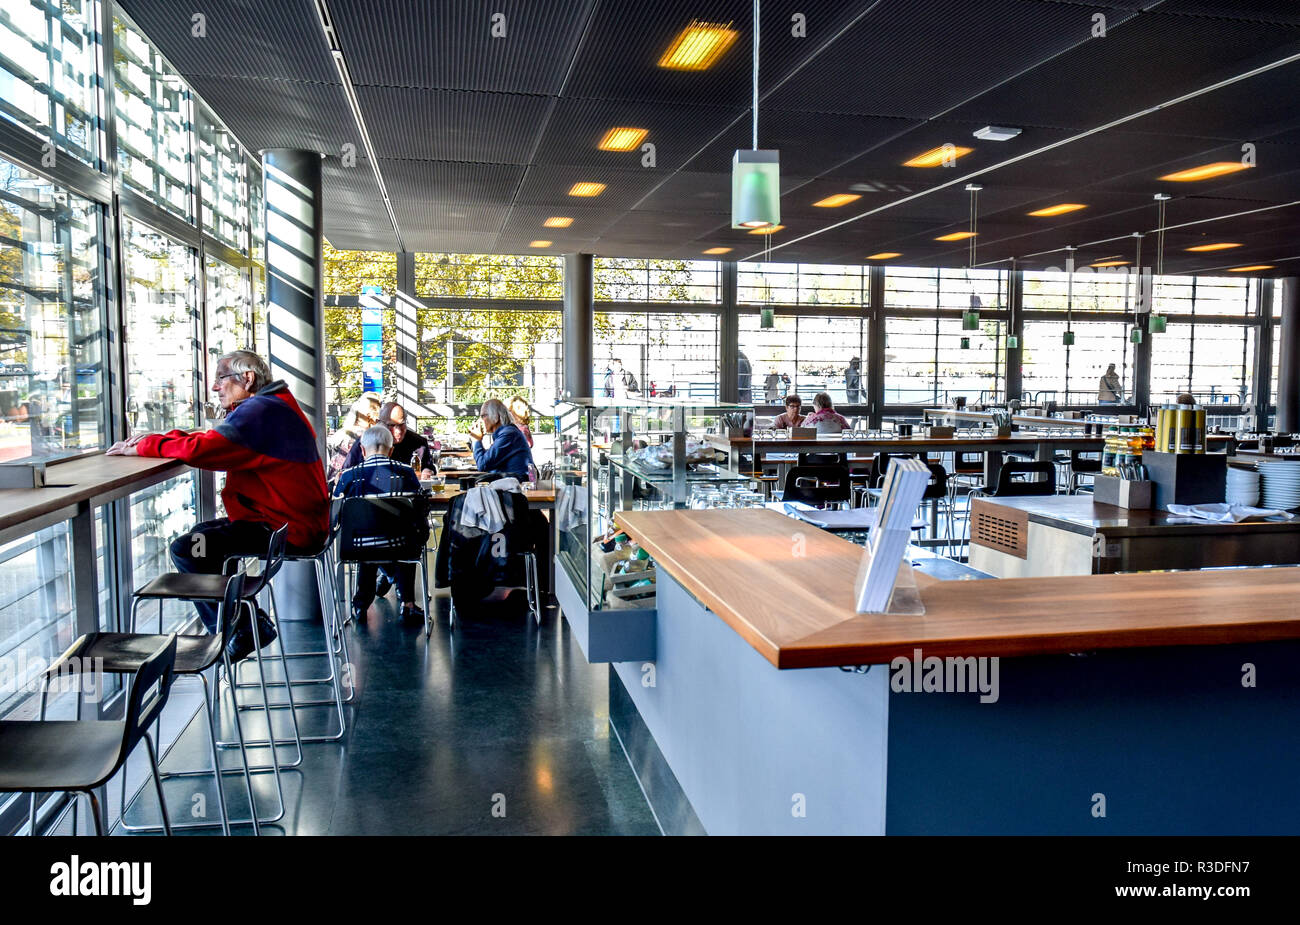 Enjoying the beautiful quality of light streaming through the windows while taking a prosecco break in the cafe at KKL museum in Lucerne, Switzerland. Stock Photo